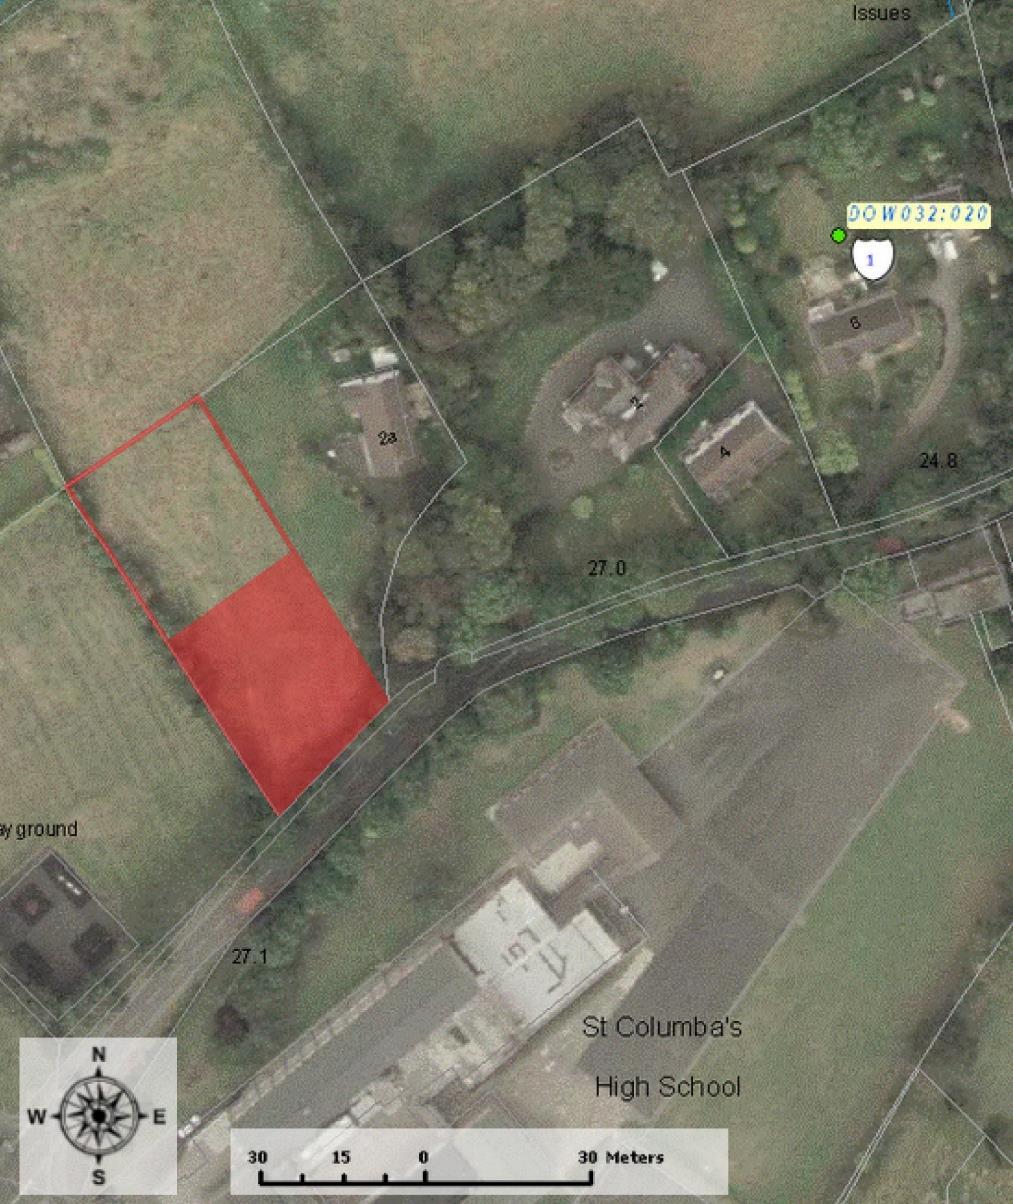 Figure 2: Development site, outlined in red: Area for development in block red, the remainder is